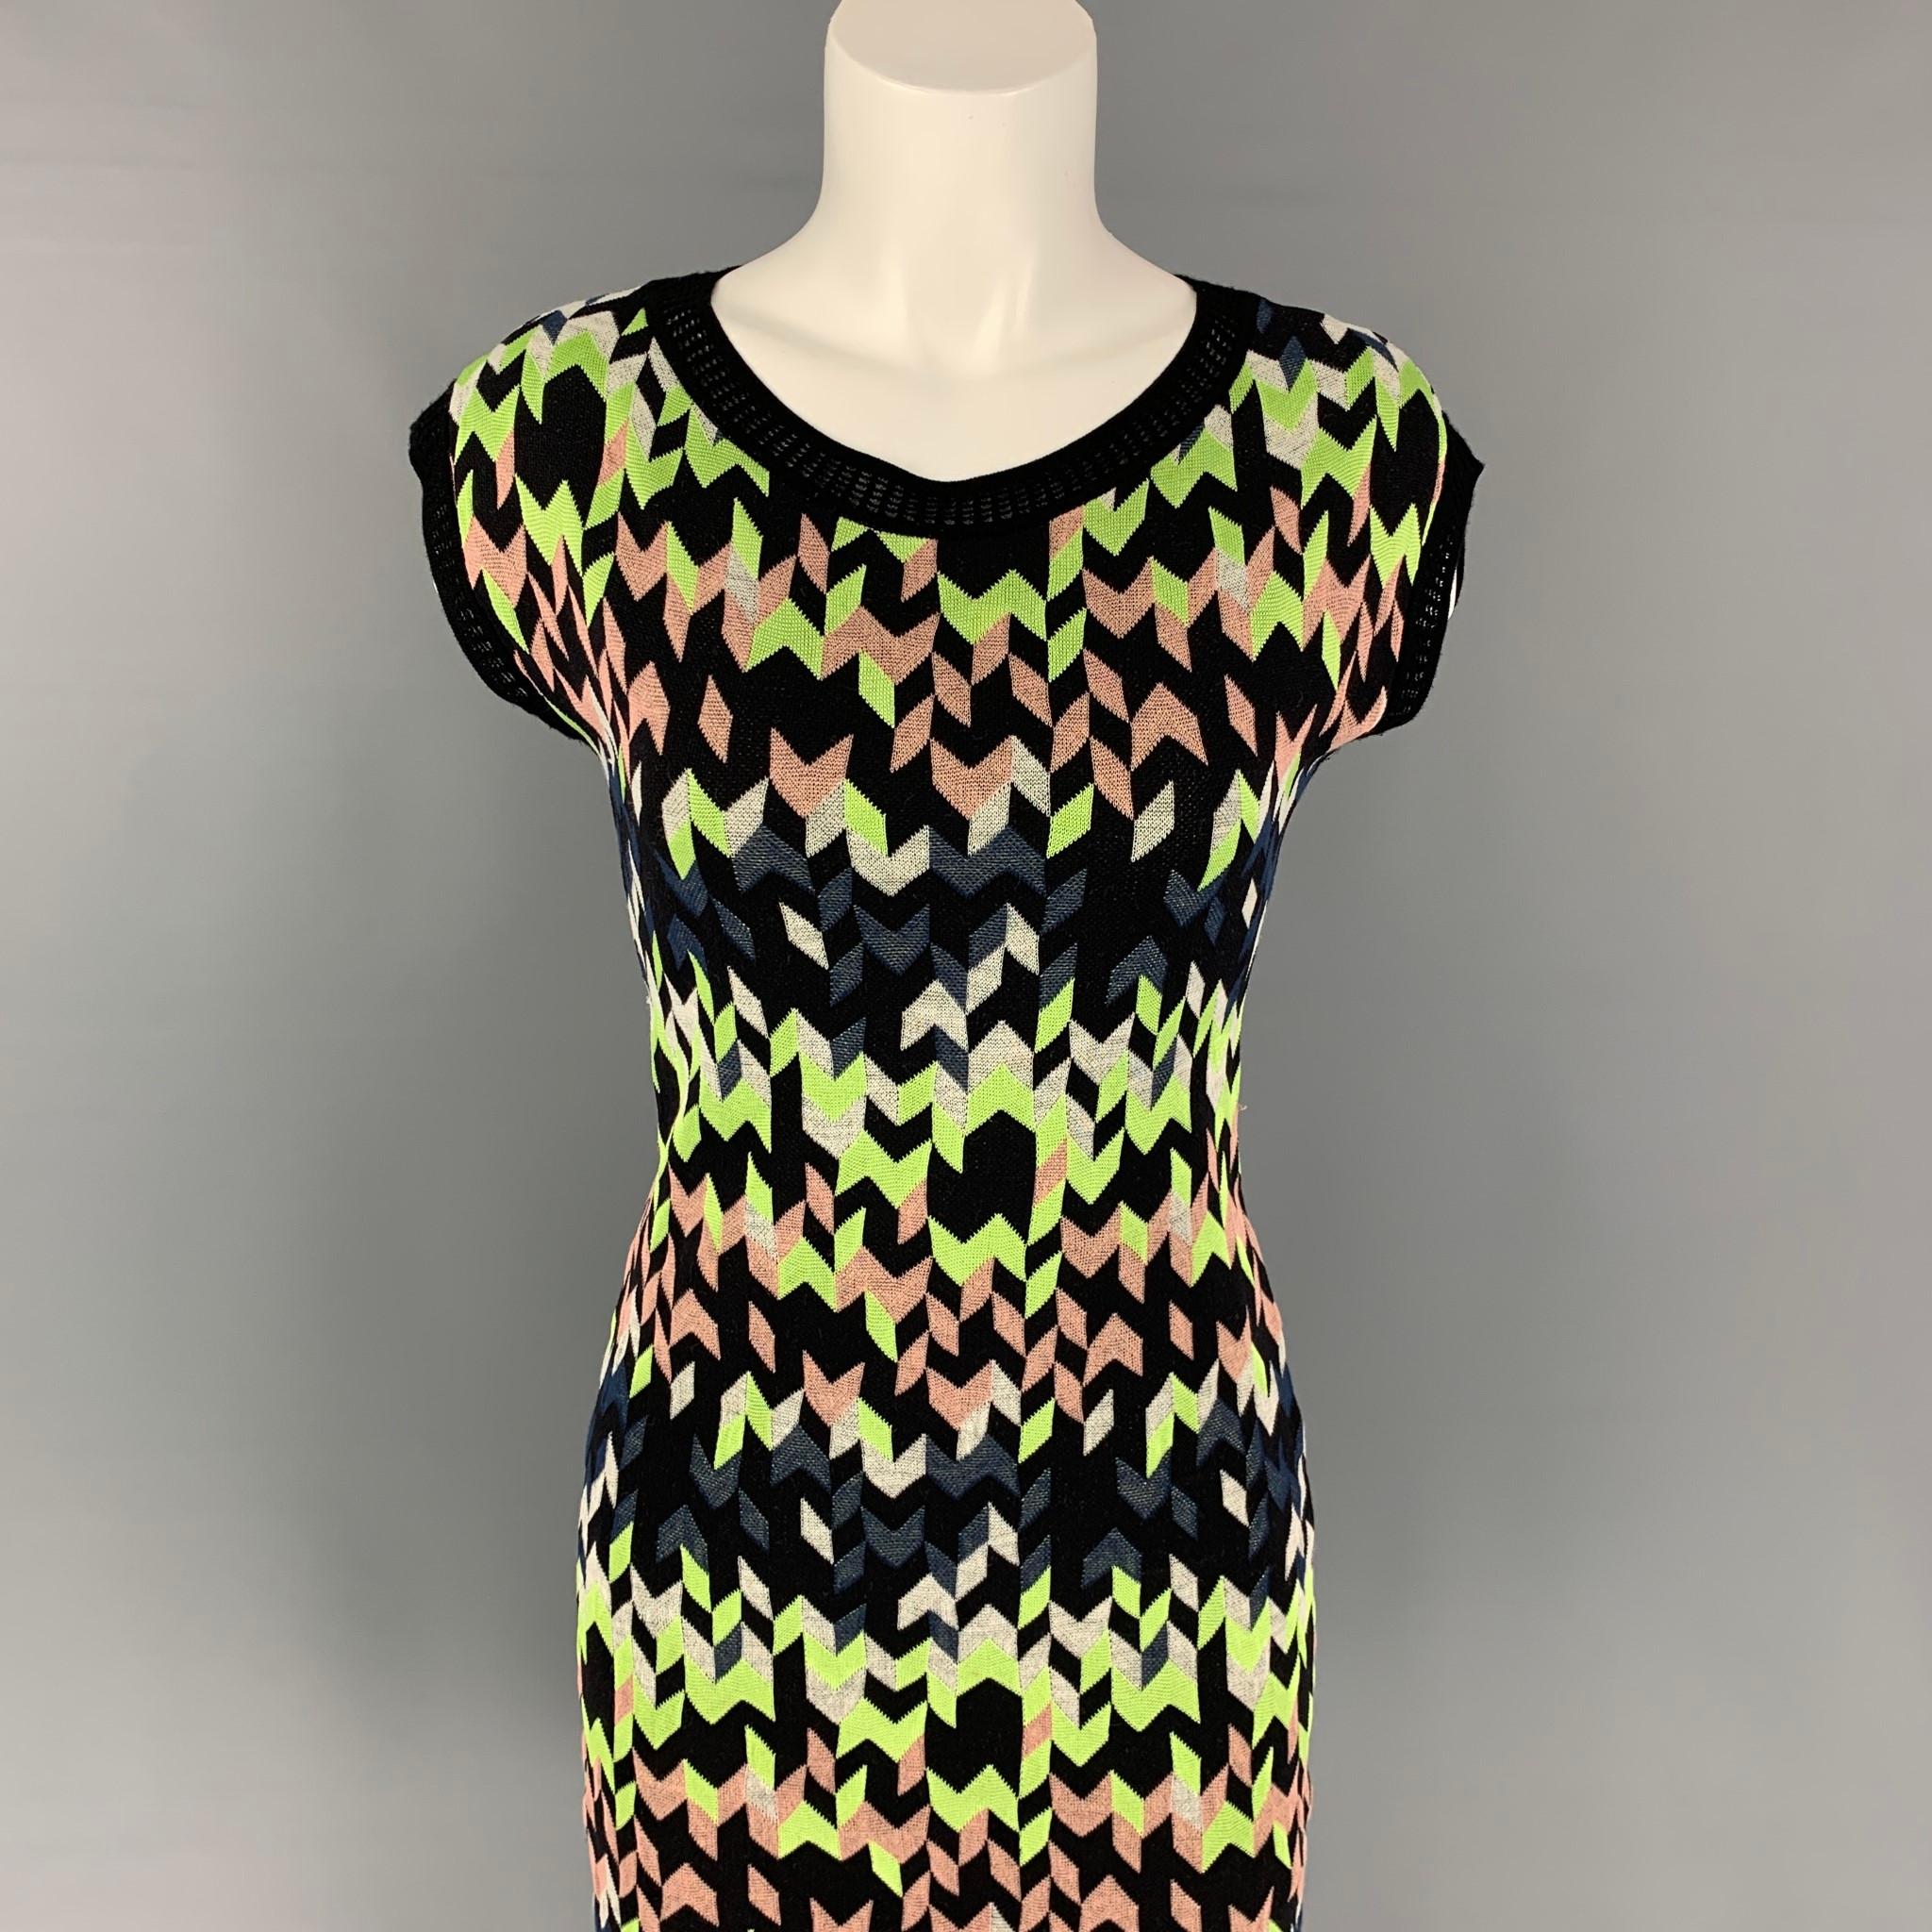 M MISSONI dress comes in a multi-color geometric knitted material featuring a sleeveless style, a-line, and a scoop neck. 

Very Good Pre-Owned Condition. Fabric tag removed.
Marked: Size tag removed.

Measurements:

Shoulder: 17 in.
Bust: 34